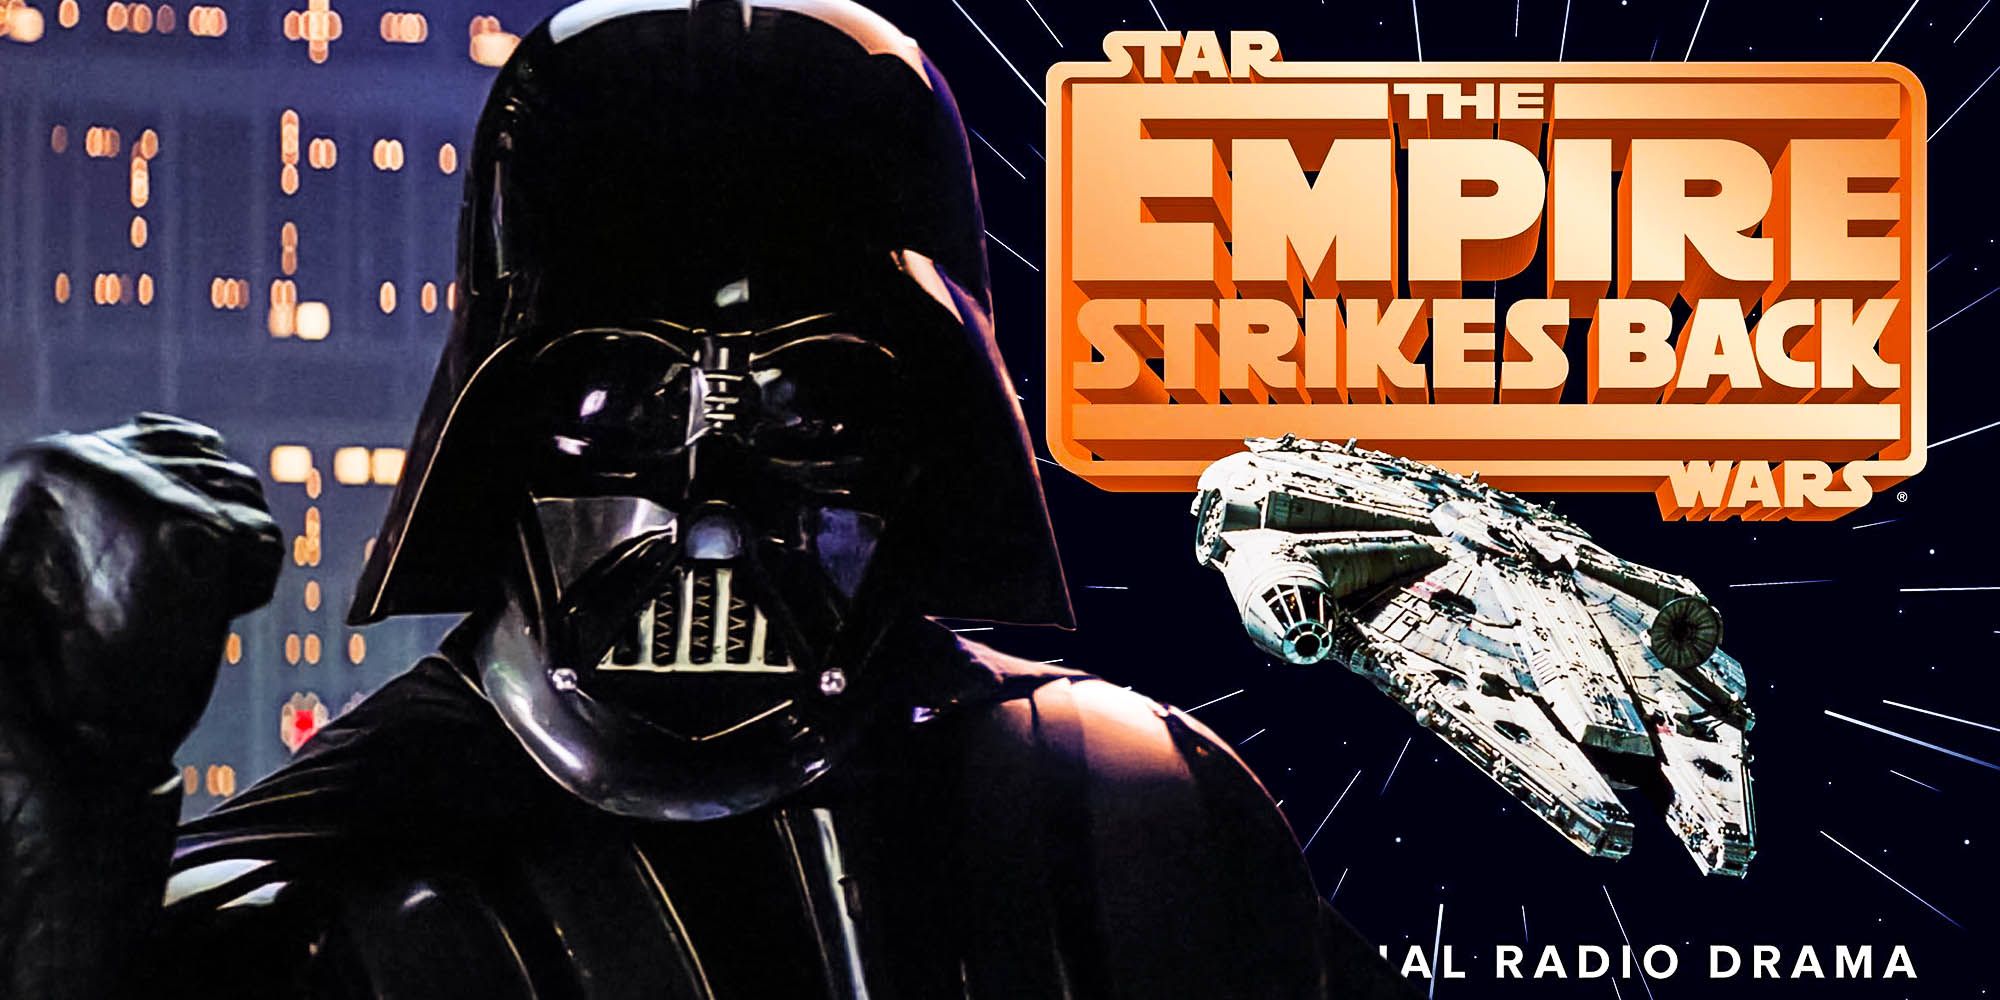 How Star Wars Retroactively Improved The Empire Strikes Back